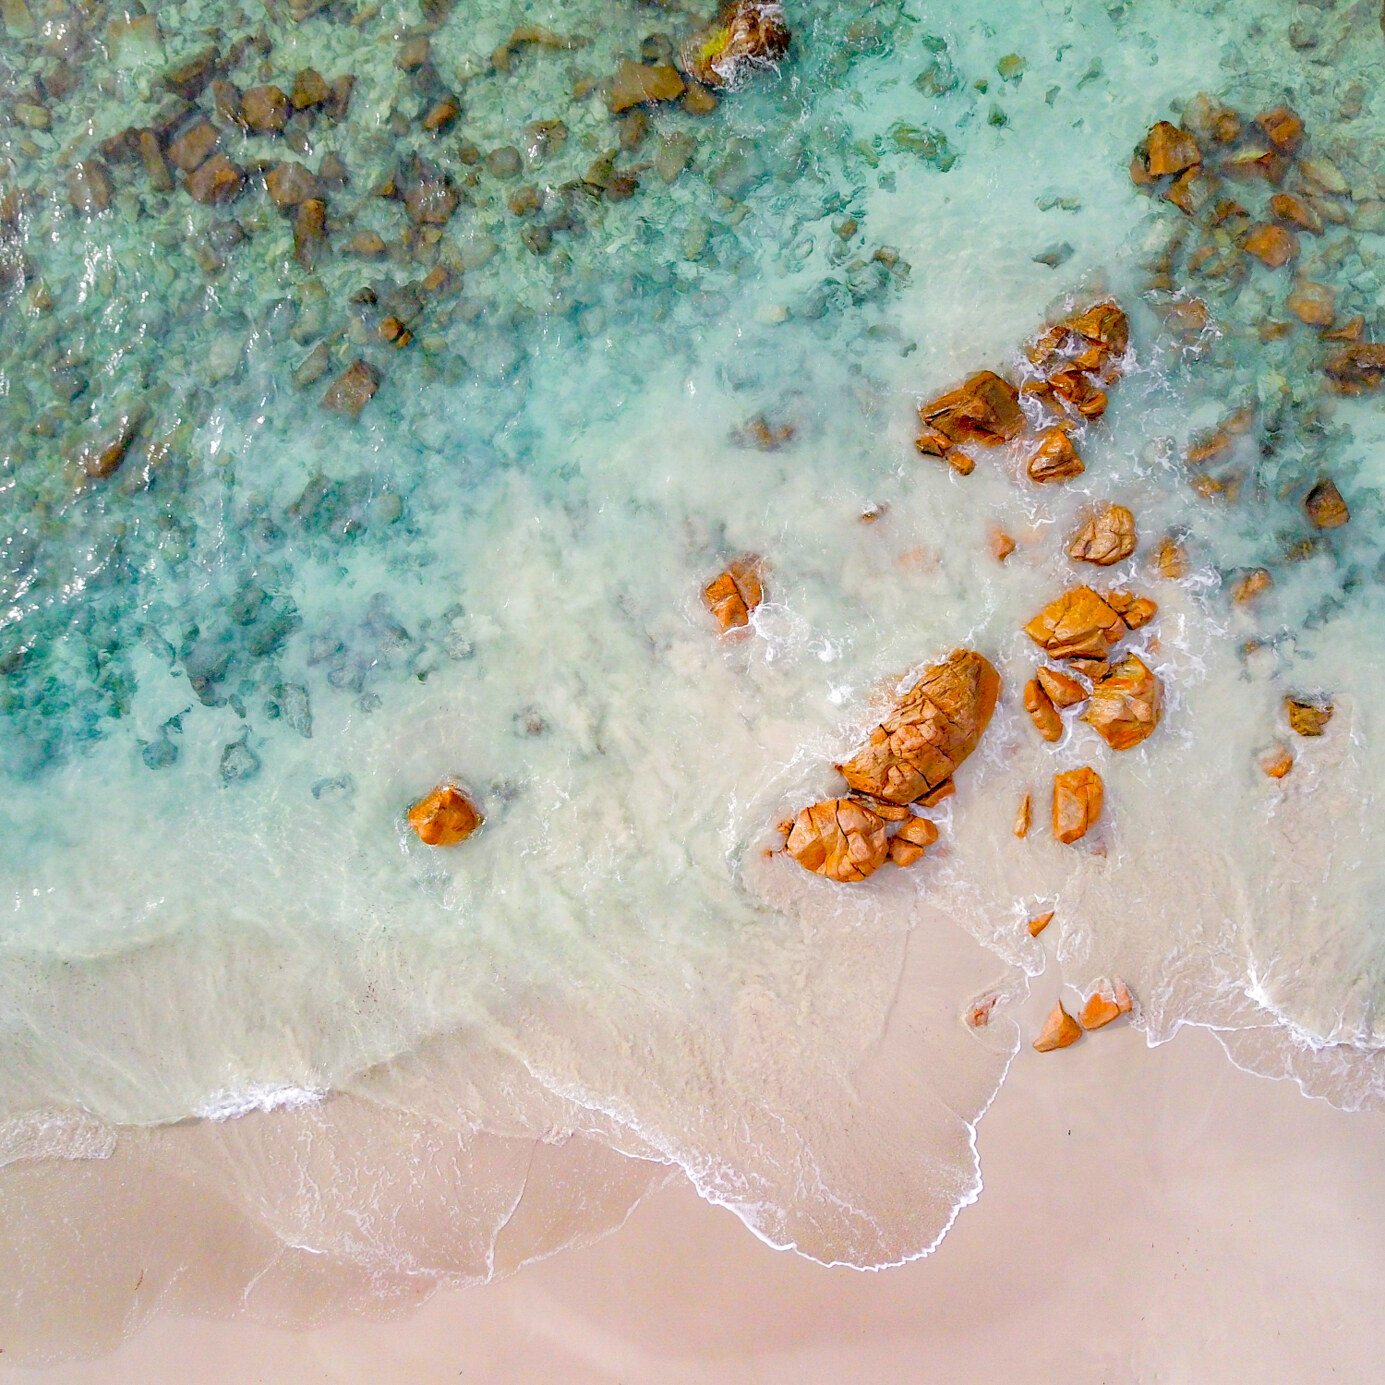 An aerial image of a shallow beach with the rocks and water forming patterns Leeuwin-Naturaliste National Park Western Australia